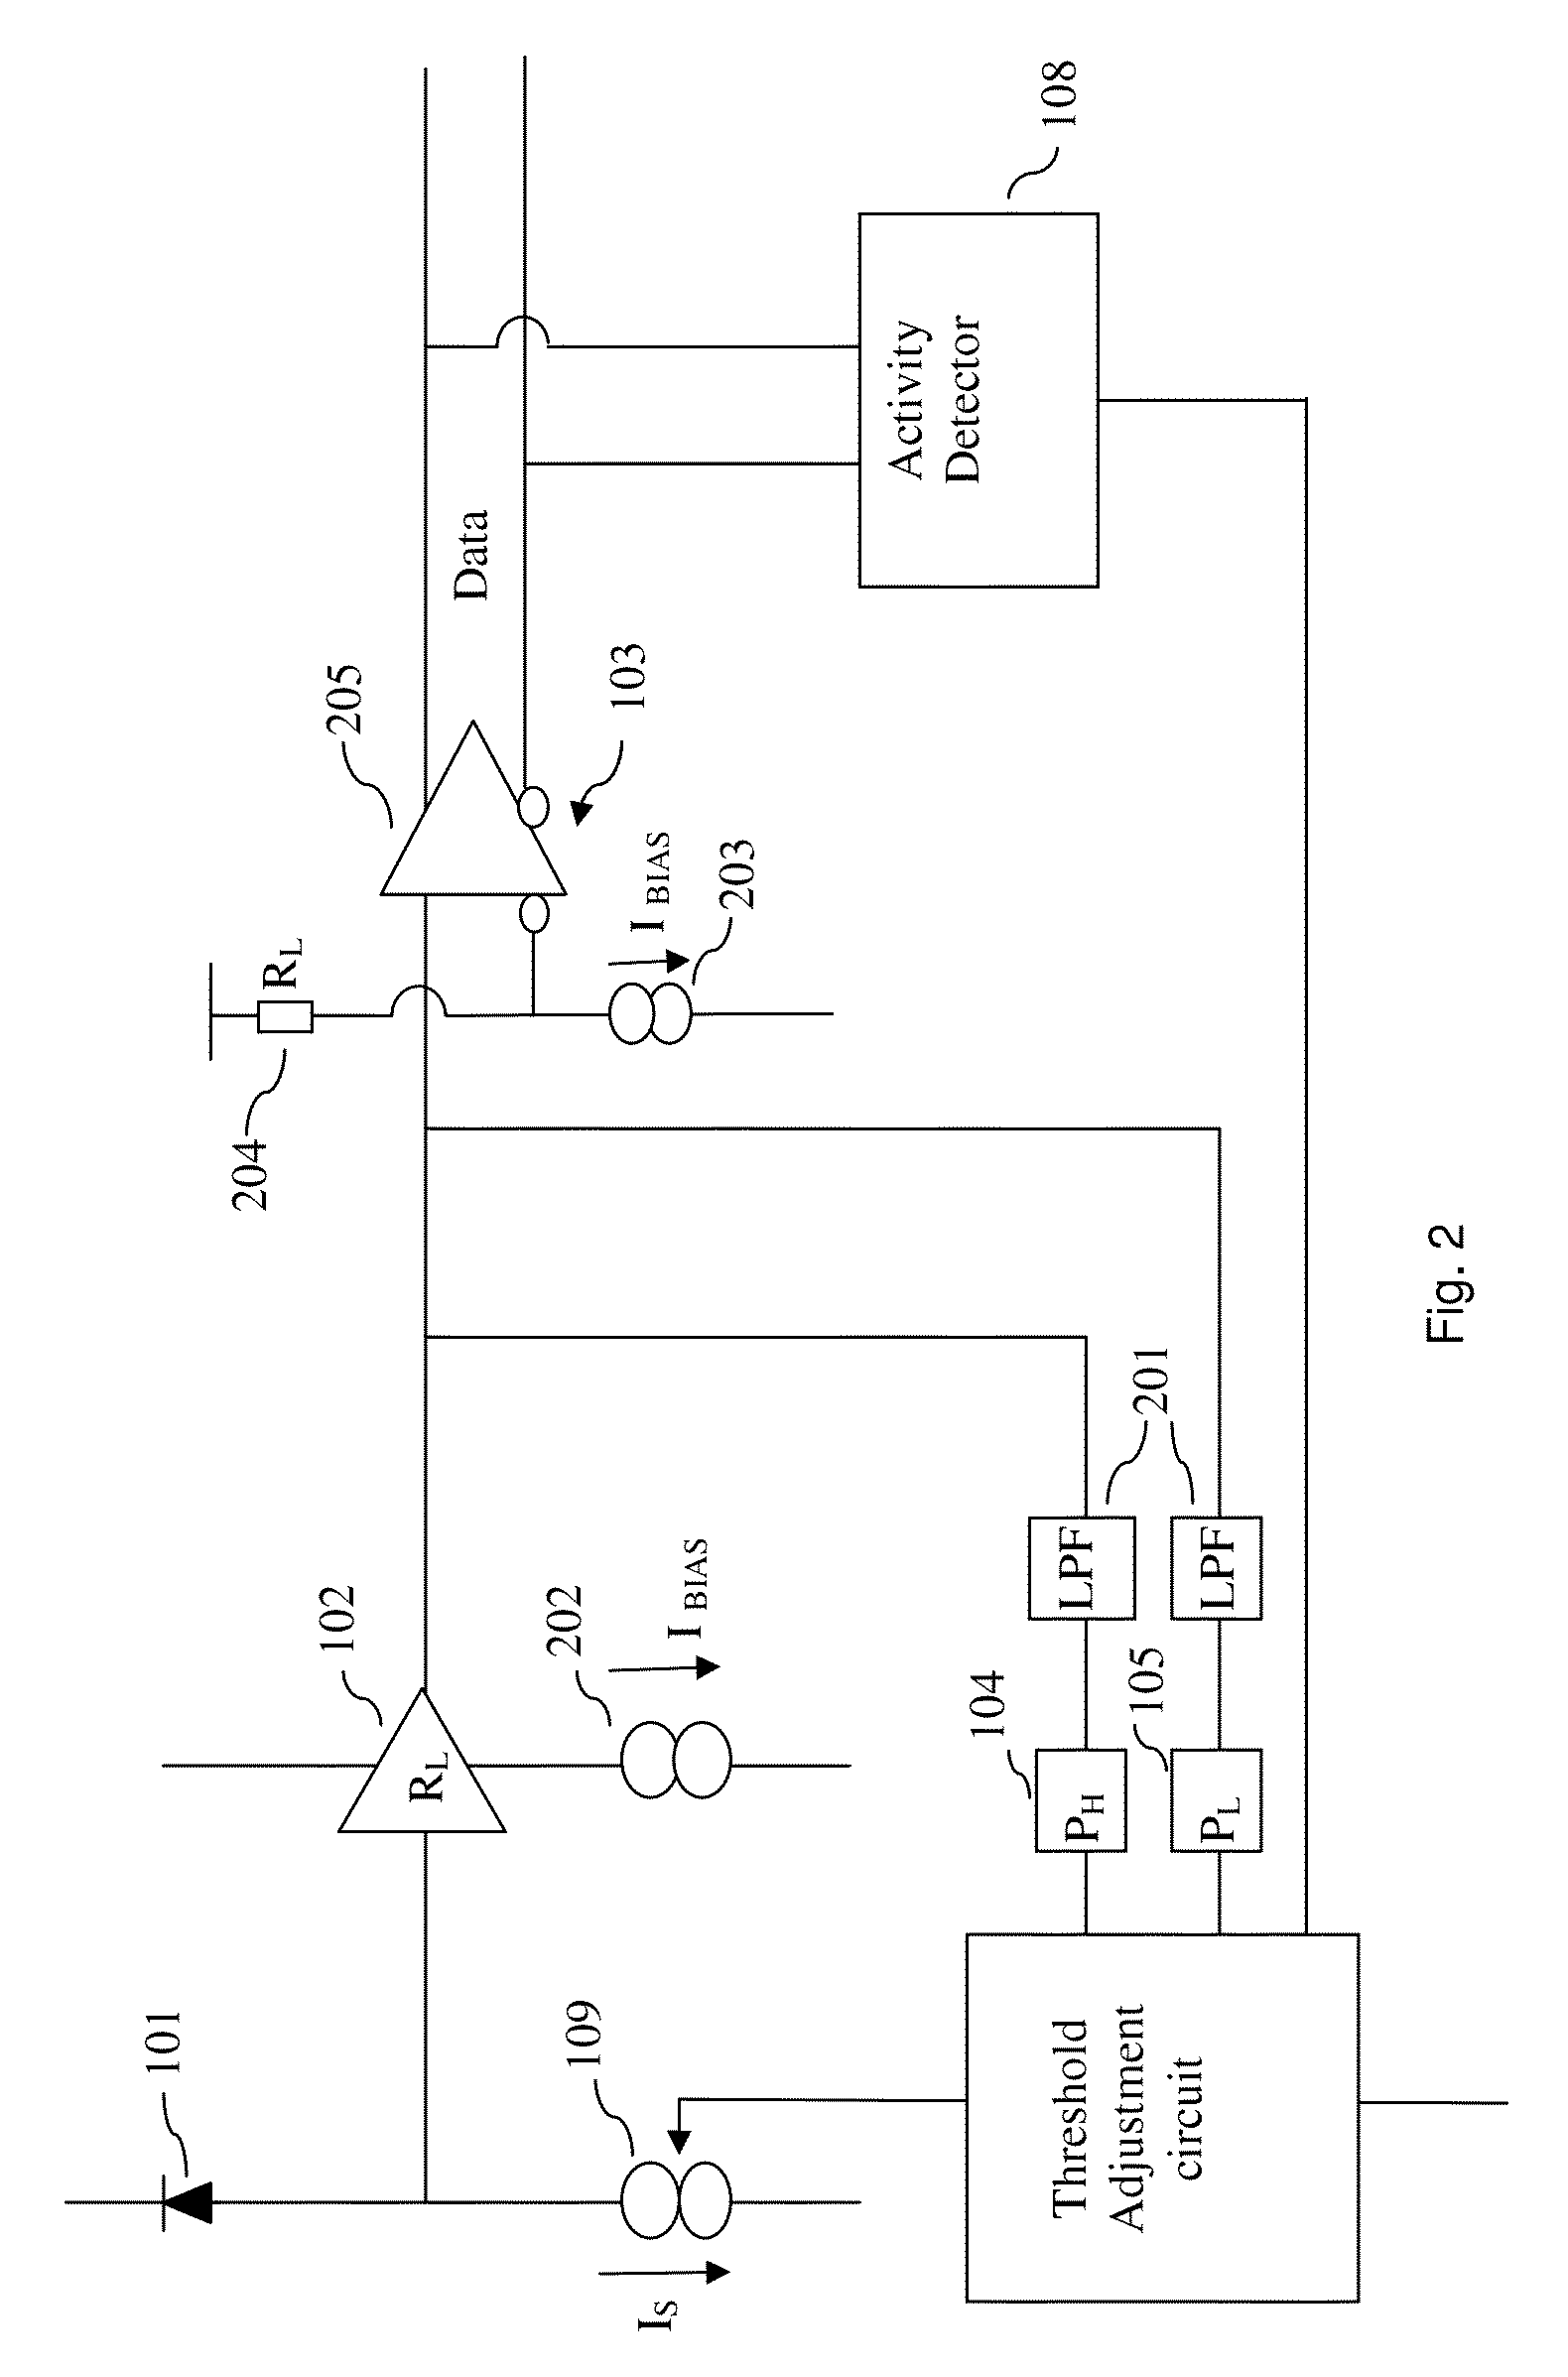 Fast optical receiver for unencoded data